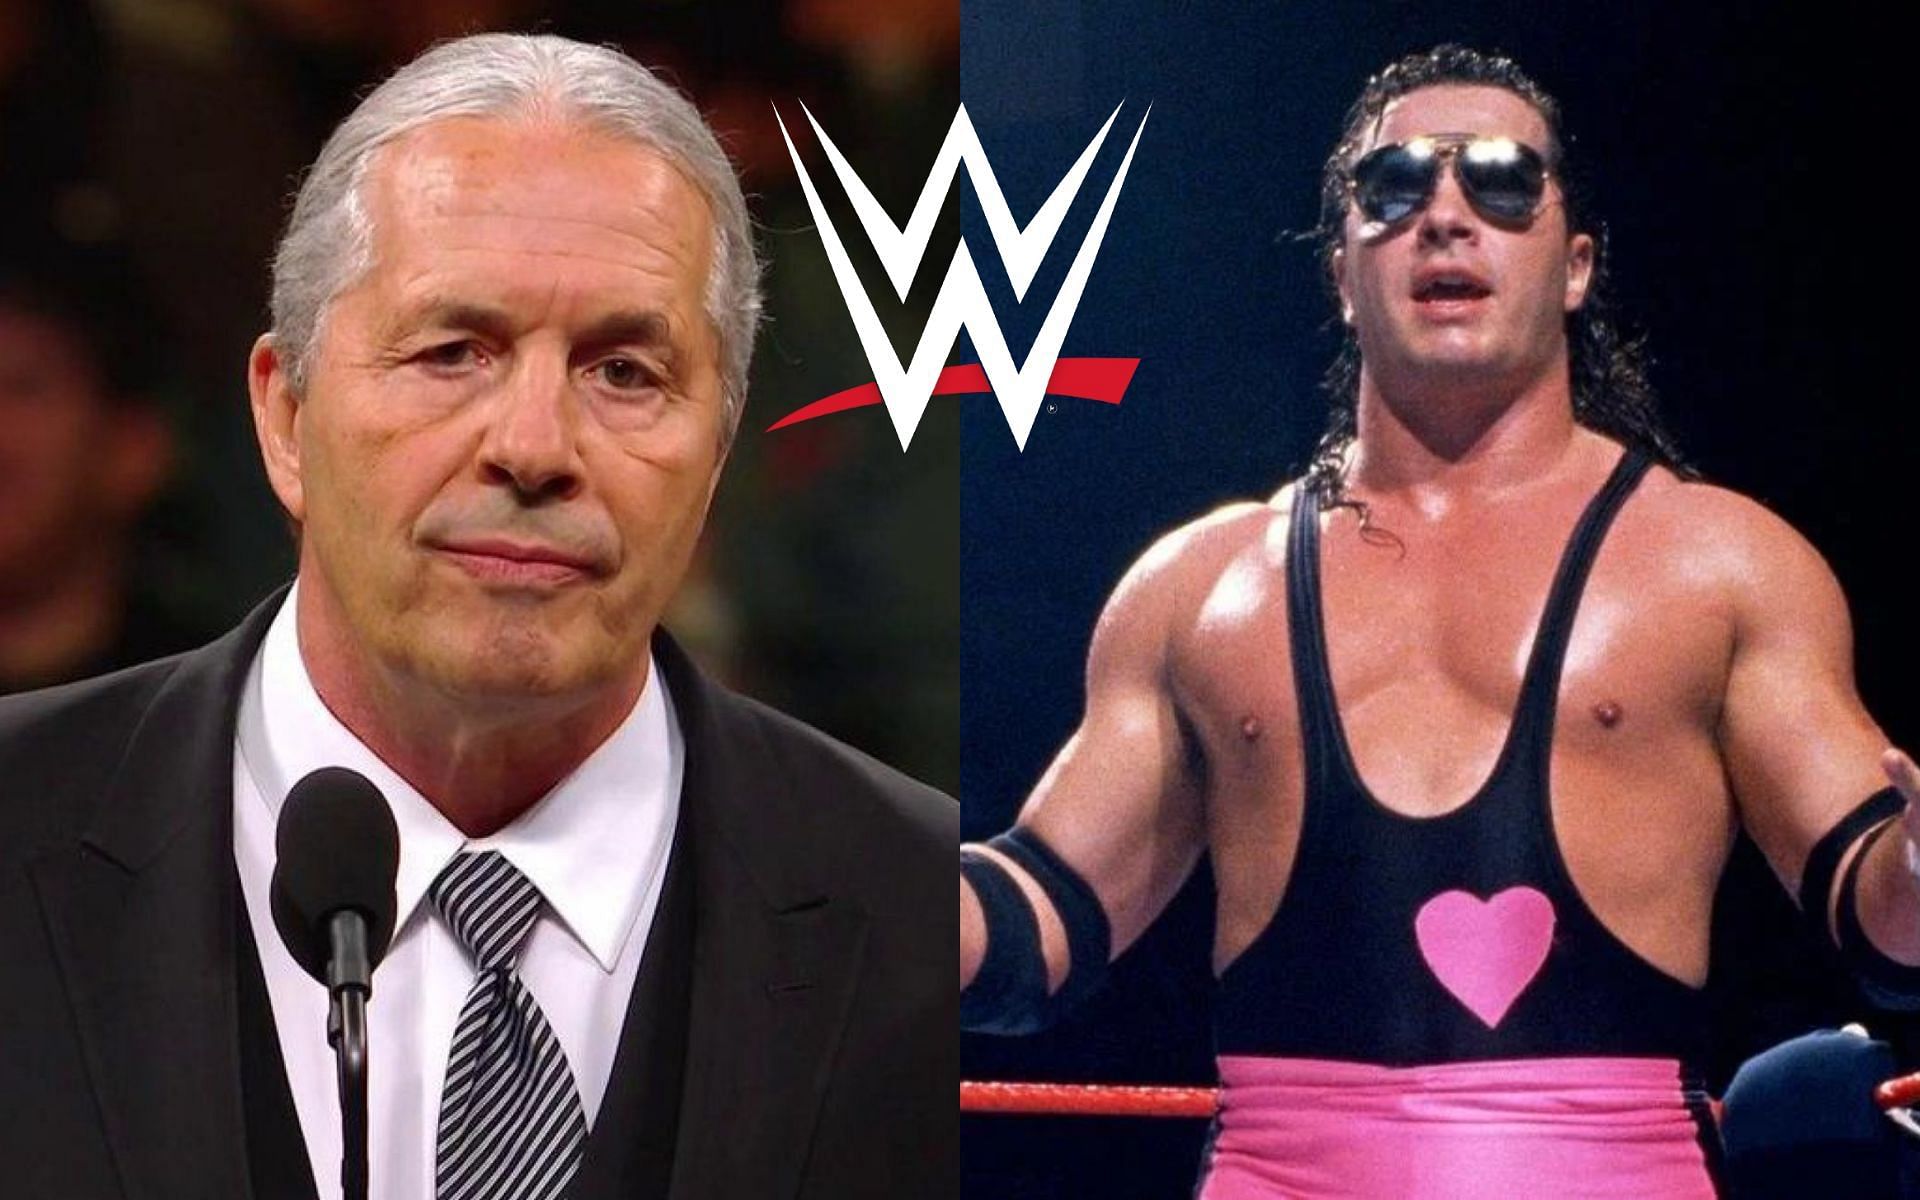 WWE legend's son shares cryptic post featuring Bret Hart